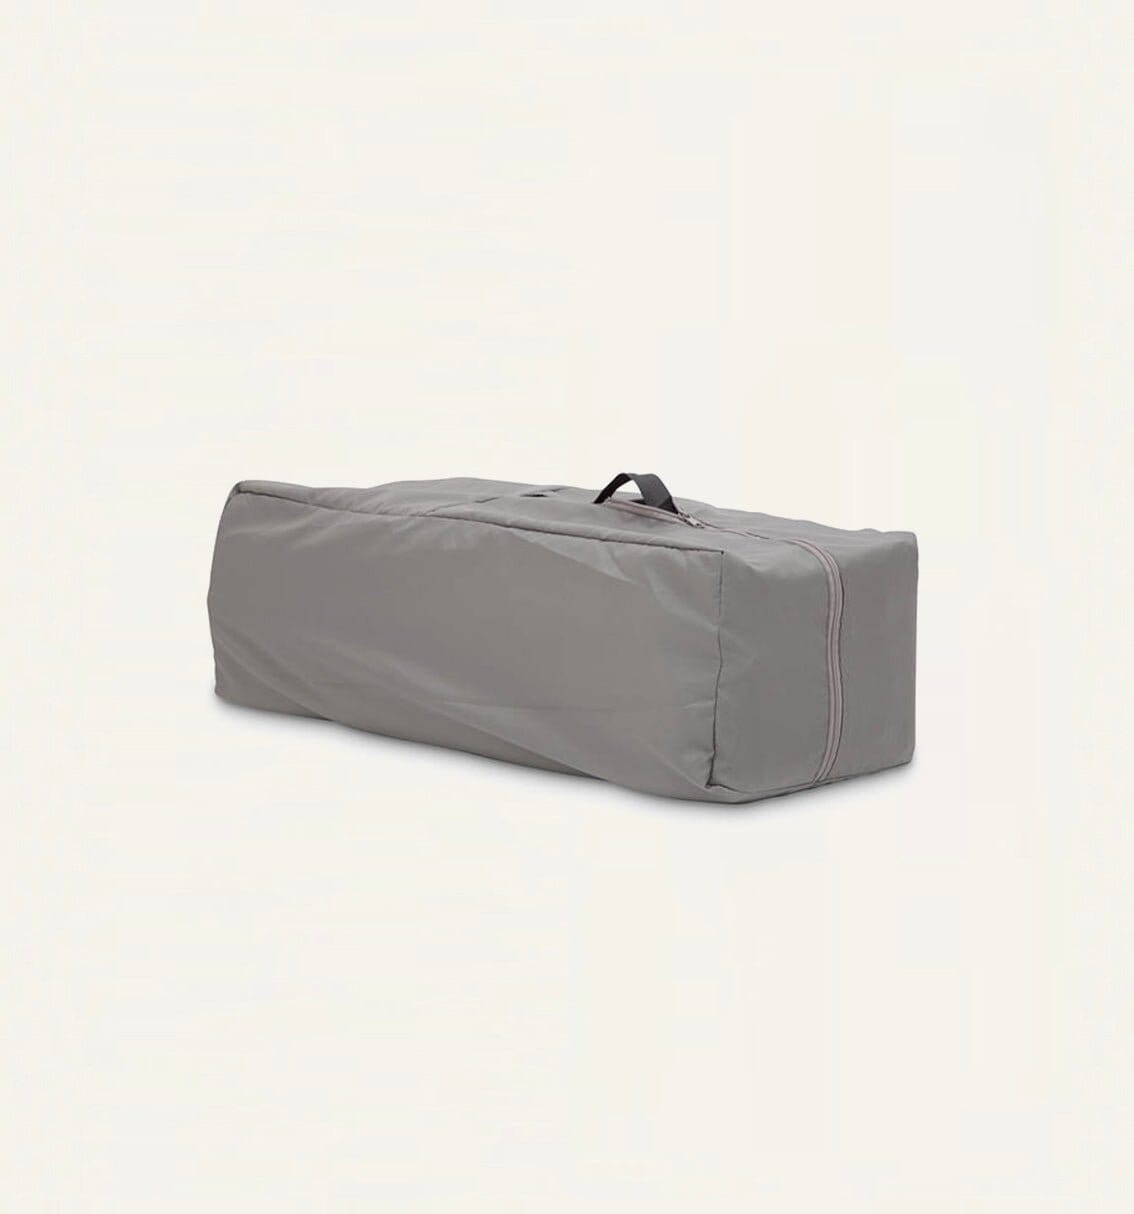 Joie Kubbie Travel Cot for rental from just £24 per month! Folded up into travel bag in image.